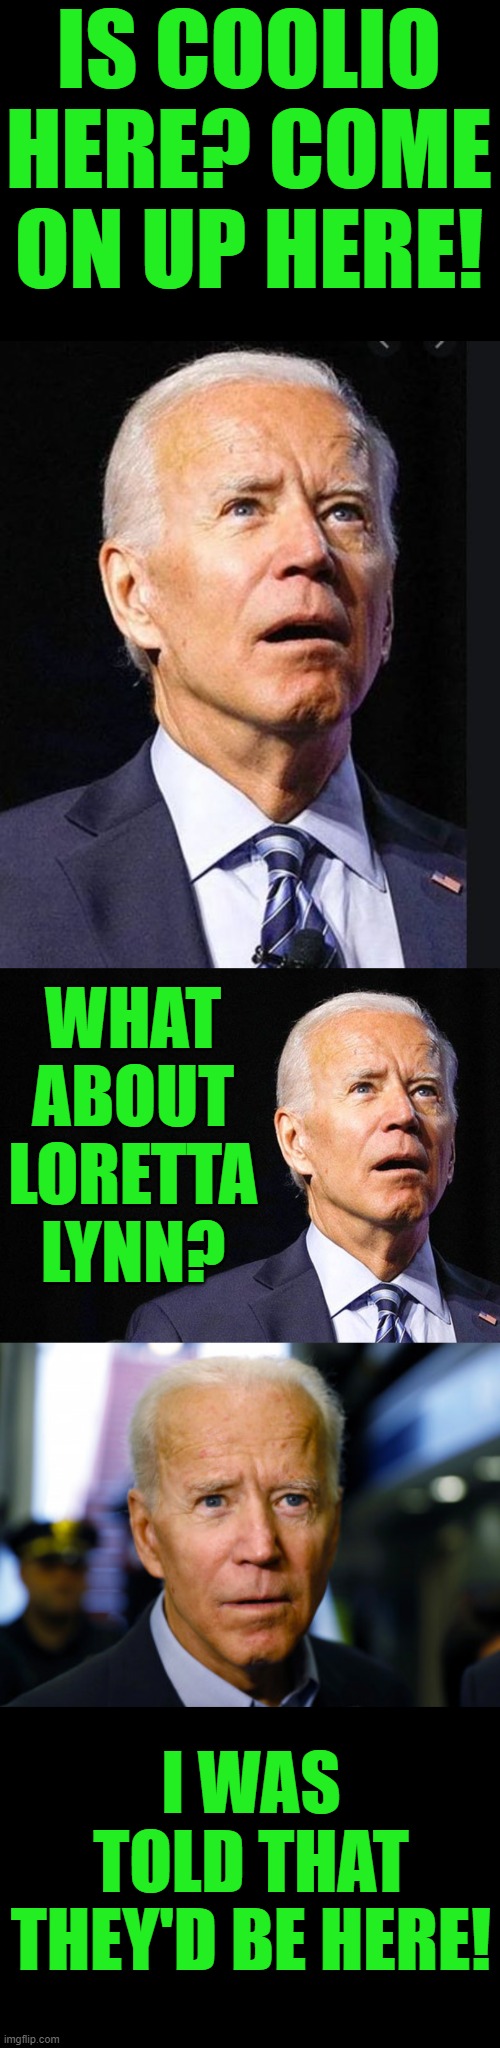 This guy's great, amiright? | IS COOLIO HERE? COME ON UP HERE! WHAT ABOUT LORETTA LYNN? I WAS TOLD THAT THEY'D BE HERE! | image tagged in confused biden,joe biden confused | made w/ Imgflip meme maker